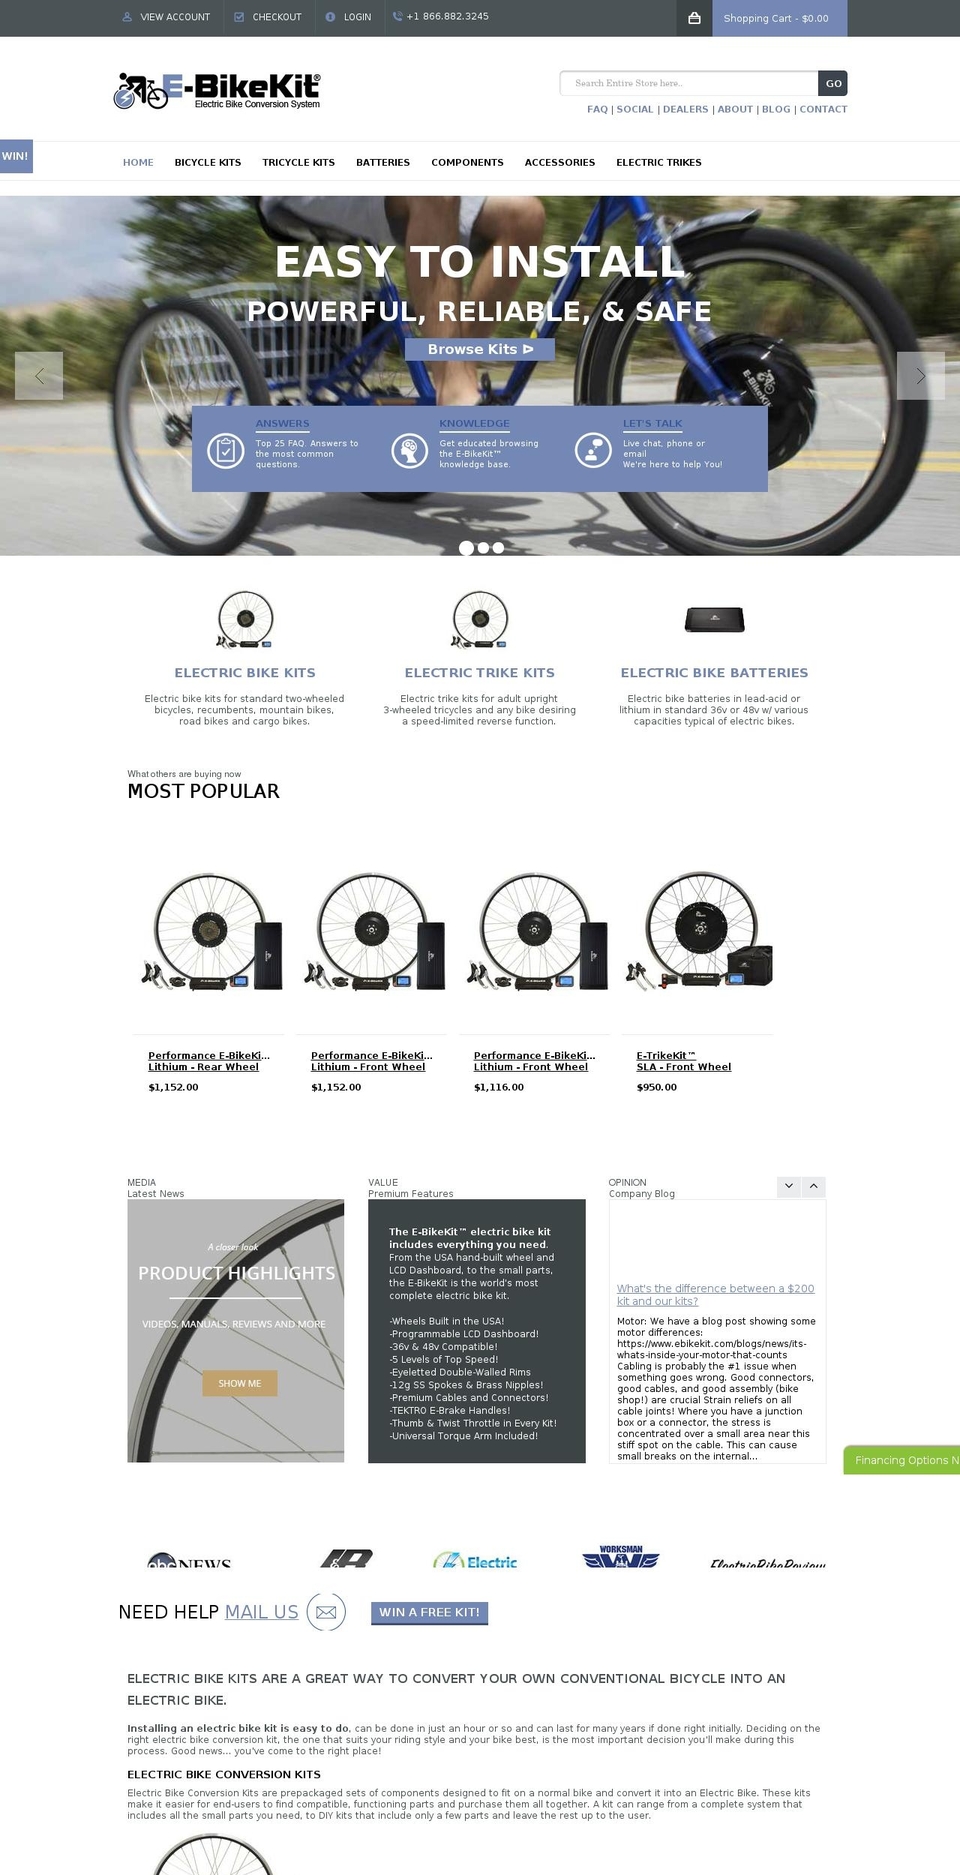 New Team Page: 10-Mar-17 Shopify theme site example ebikekit.org